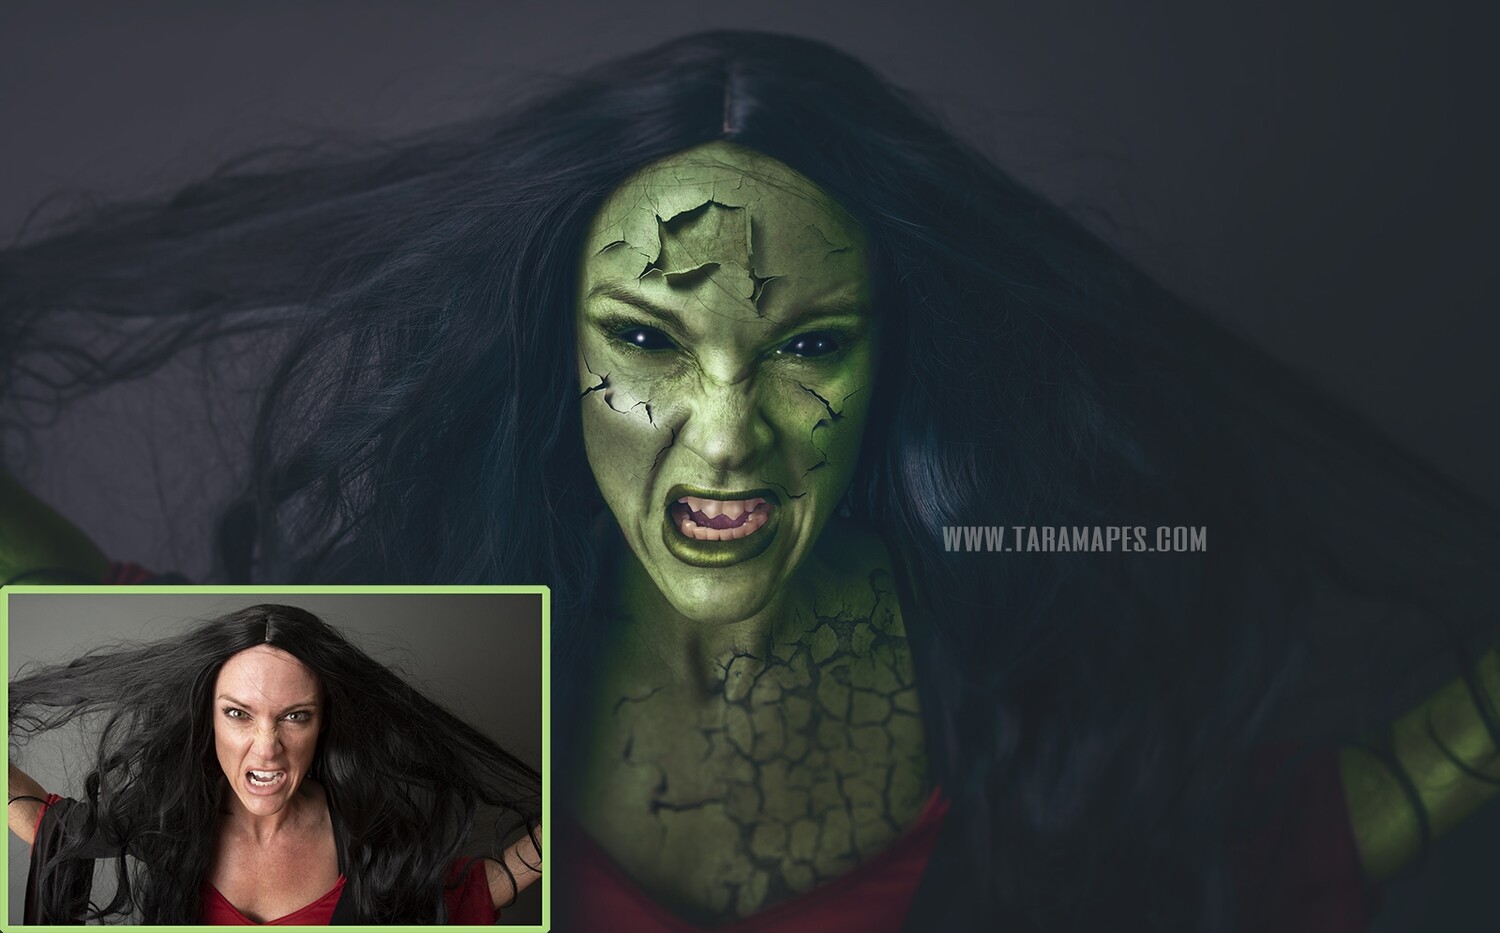 The Witch Halloween - Black Eyes and Cracked Skin Painterly Fine Art Photoshop Tutorial by Tara Mapes